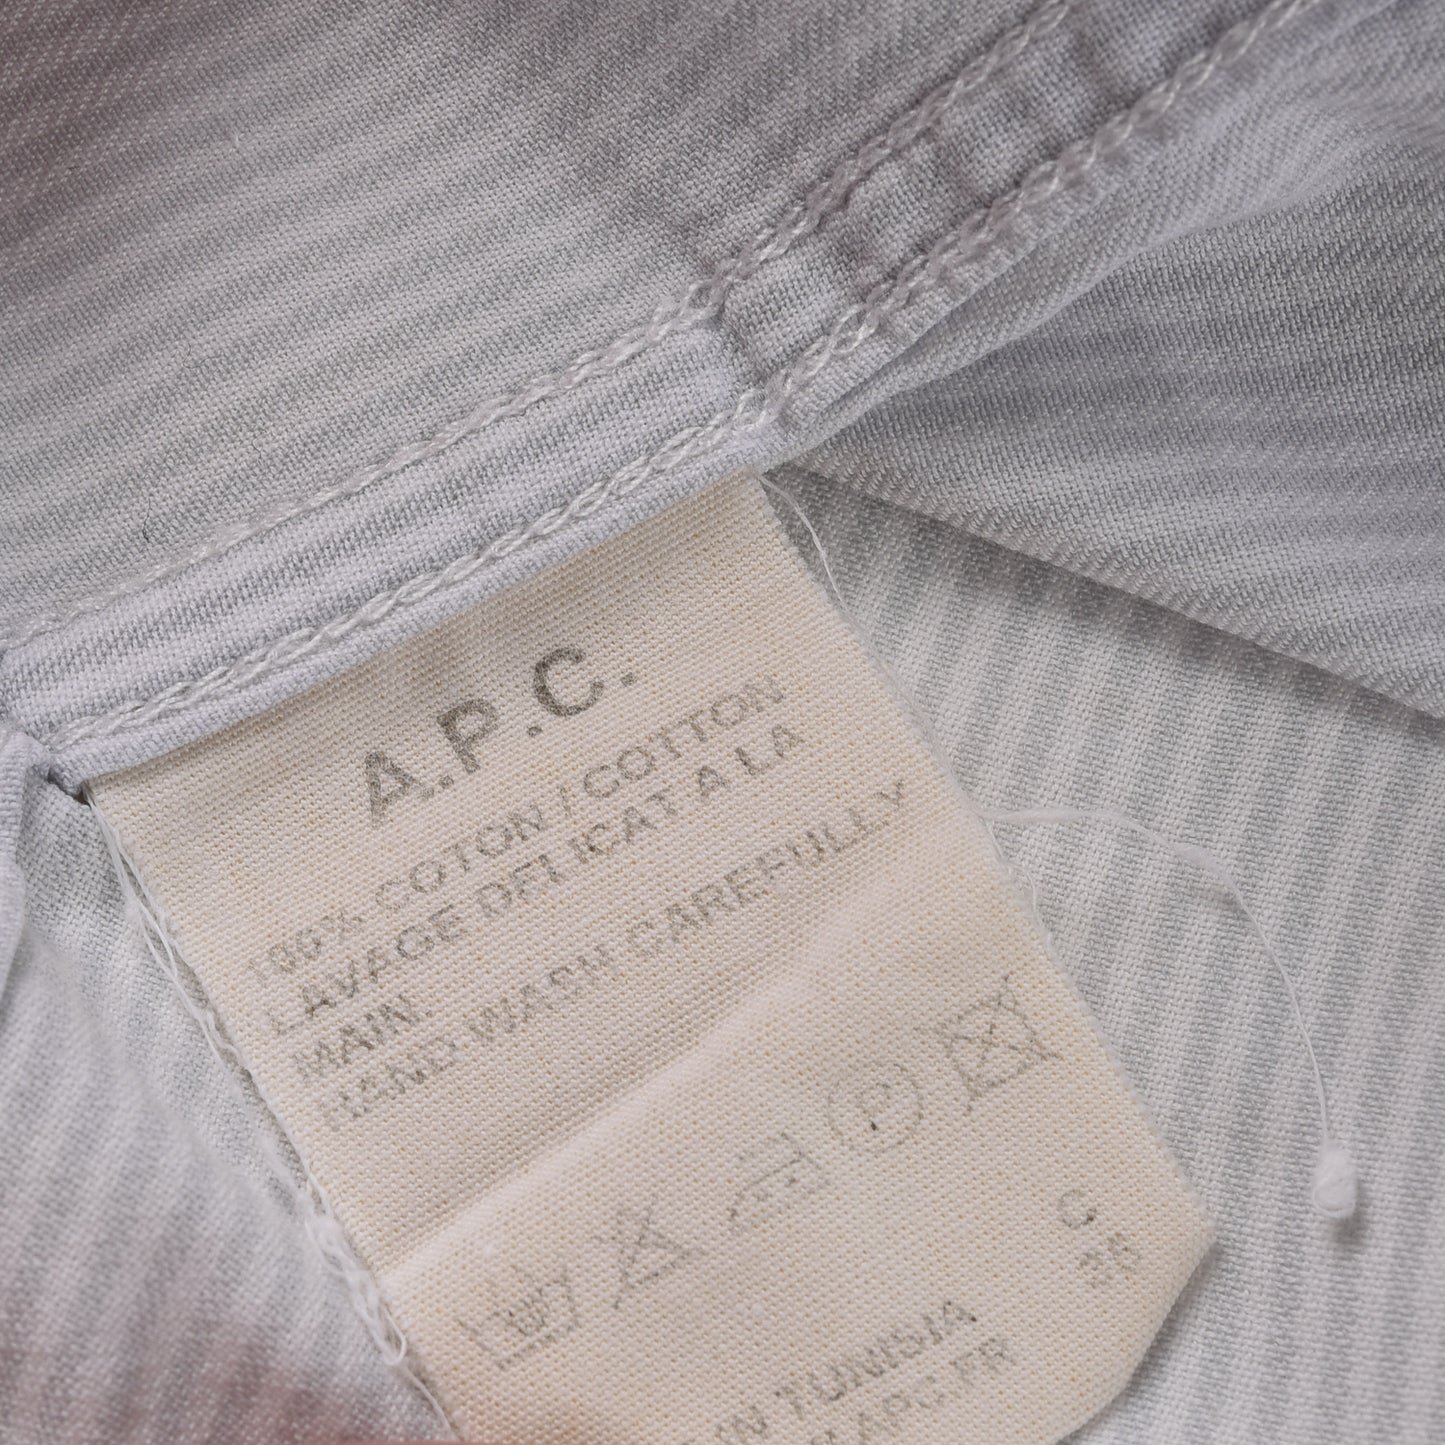 USED A.P.C. WORK SHIRT - NATURAL STRIPE